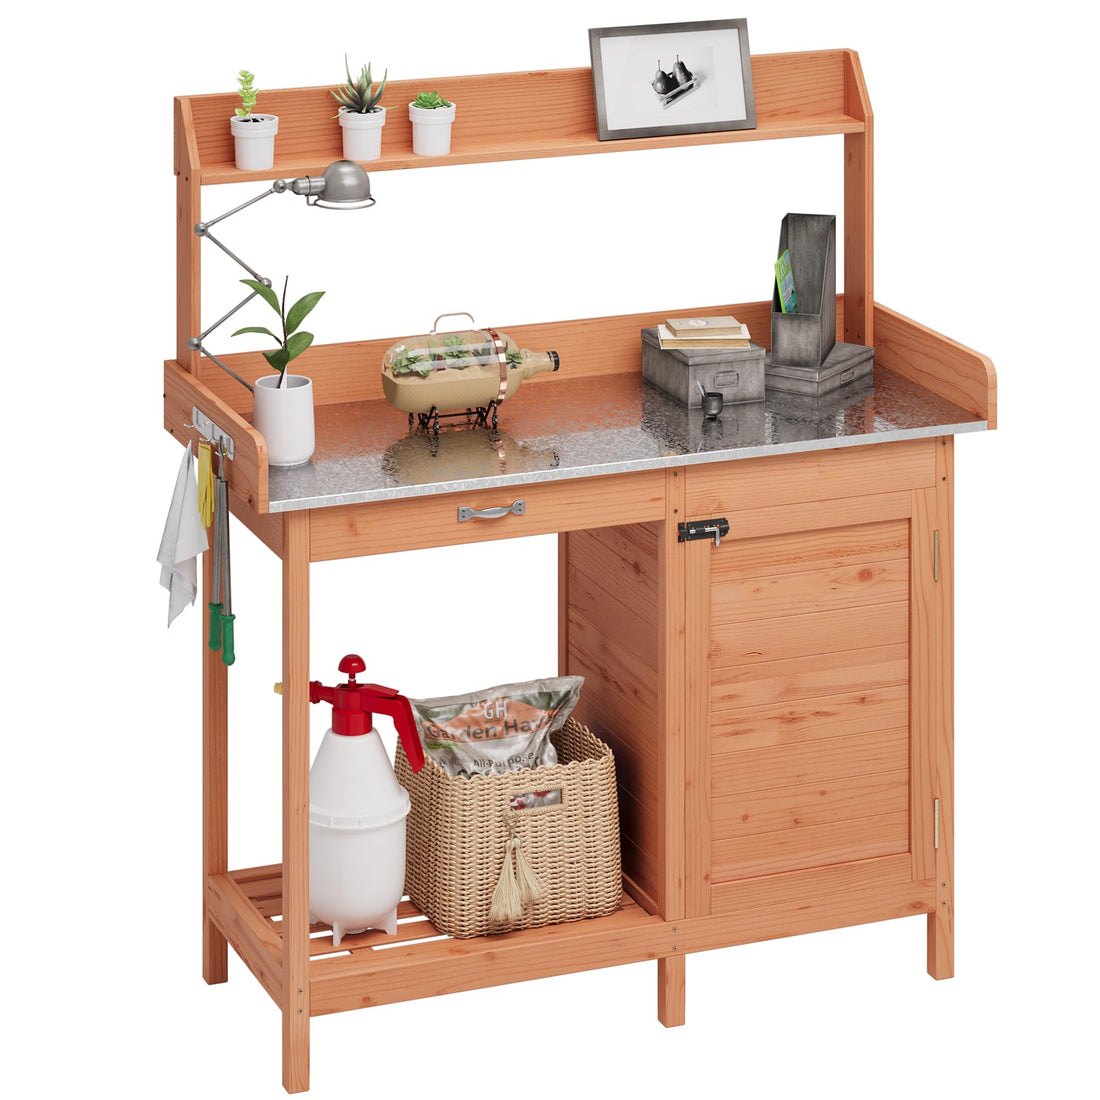 Potting Bench-Natural Wood Large Garden Outdoor Work Bench with Cabinet, Metal Tabletop, Sliding Drawer, Open Shelf for Outside